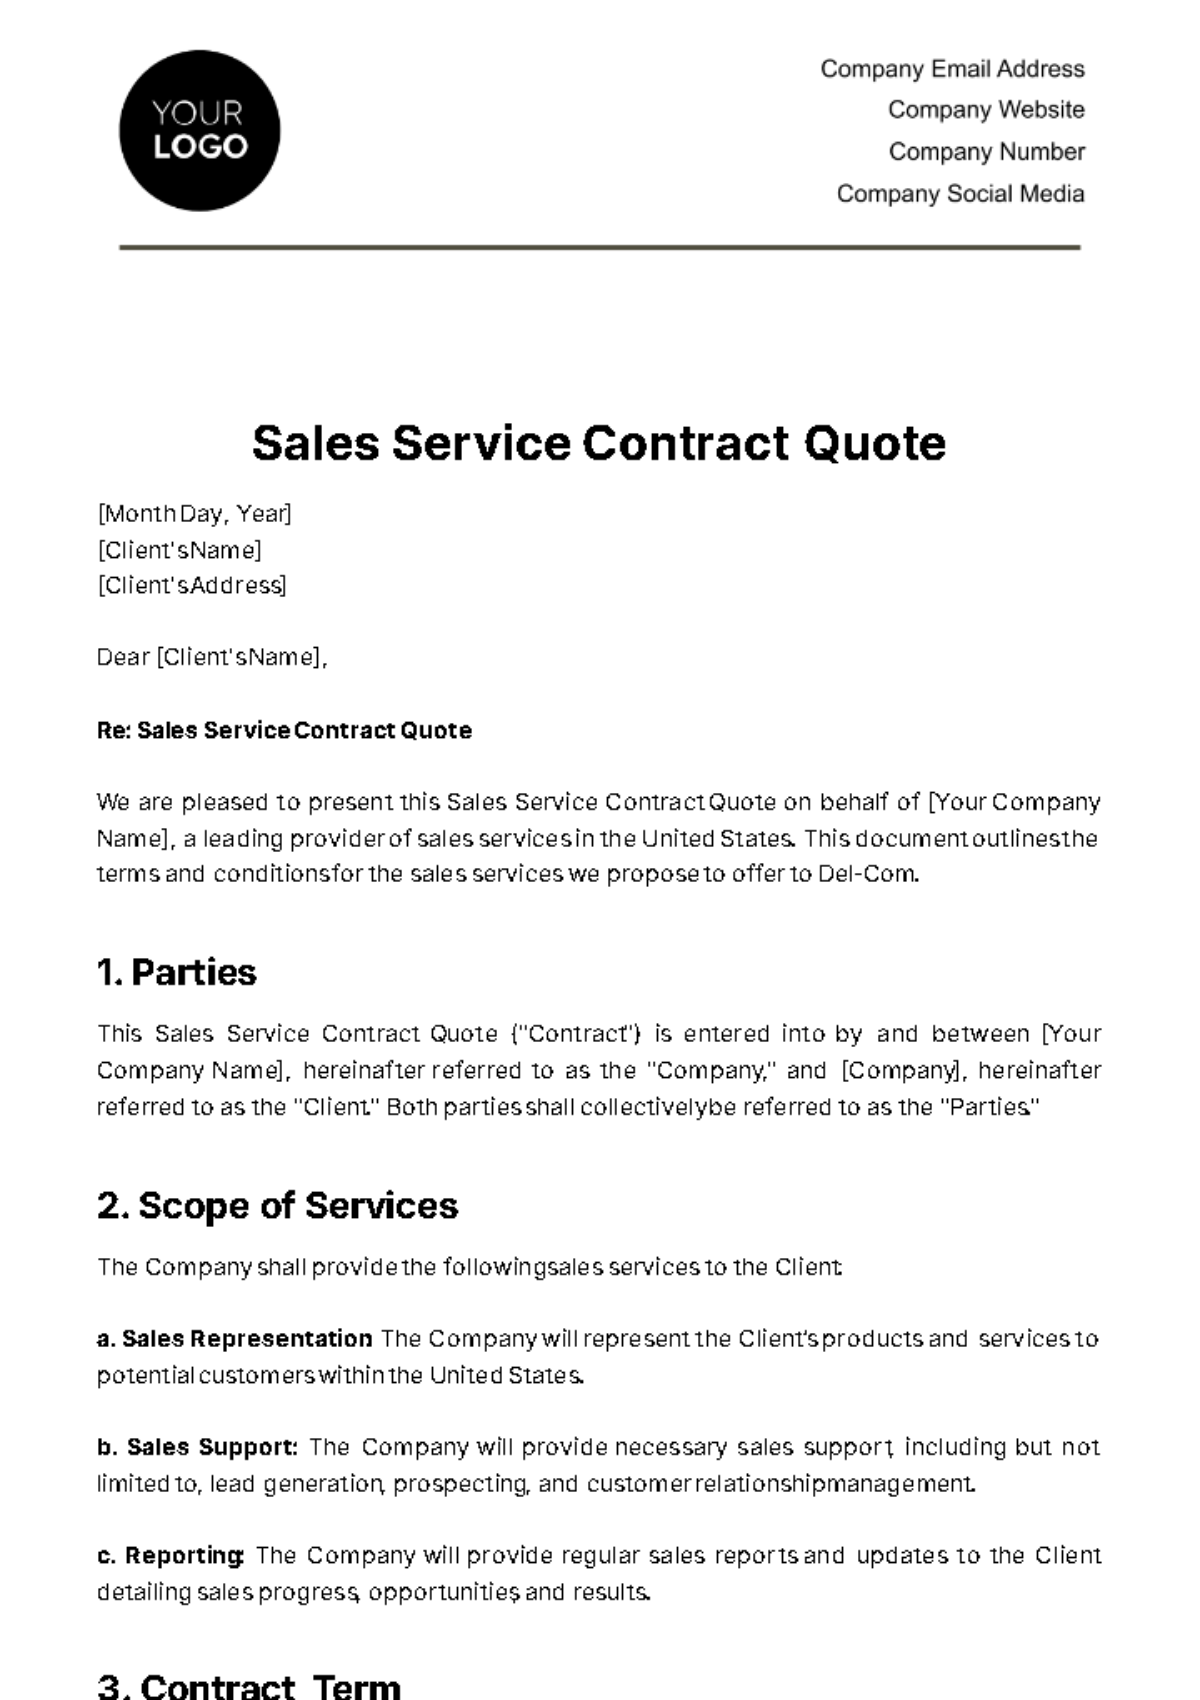 Sales Service Contract Quote Template